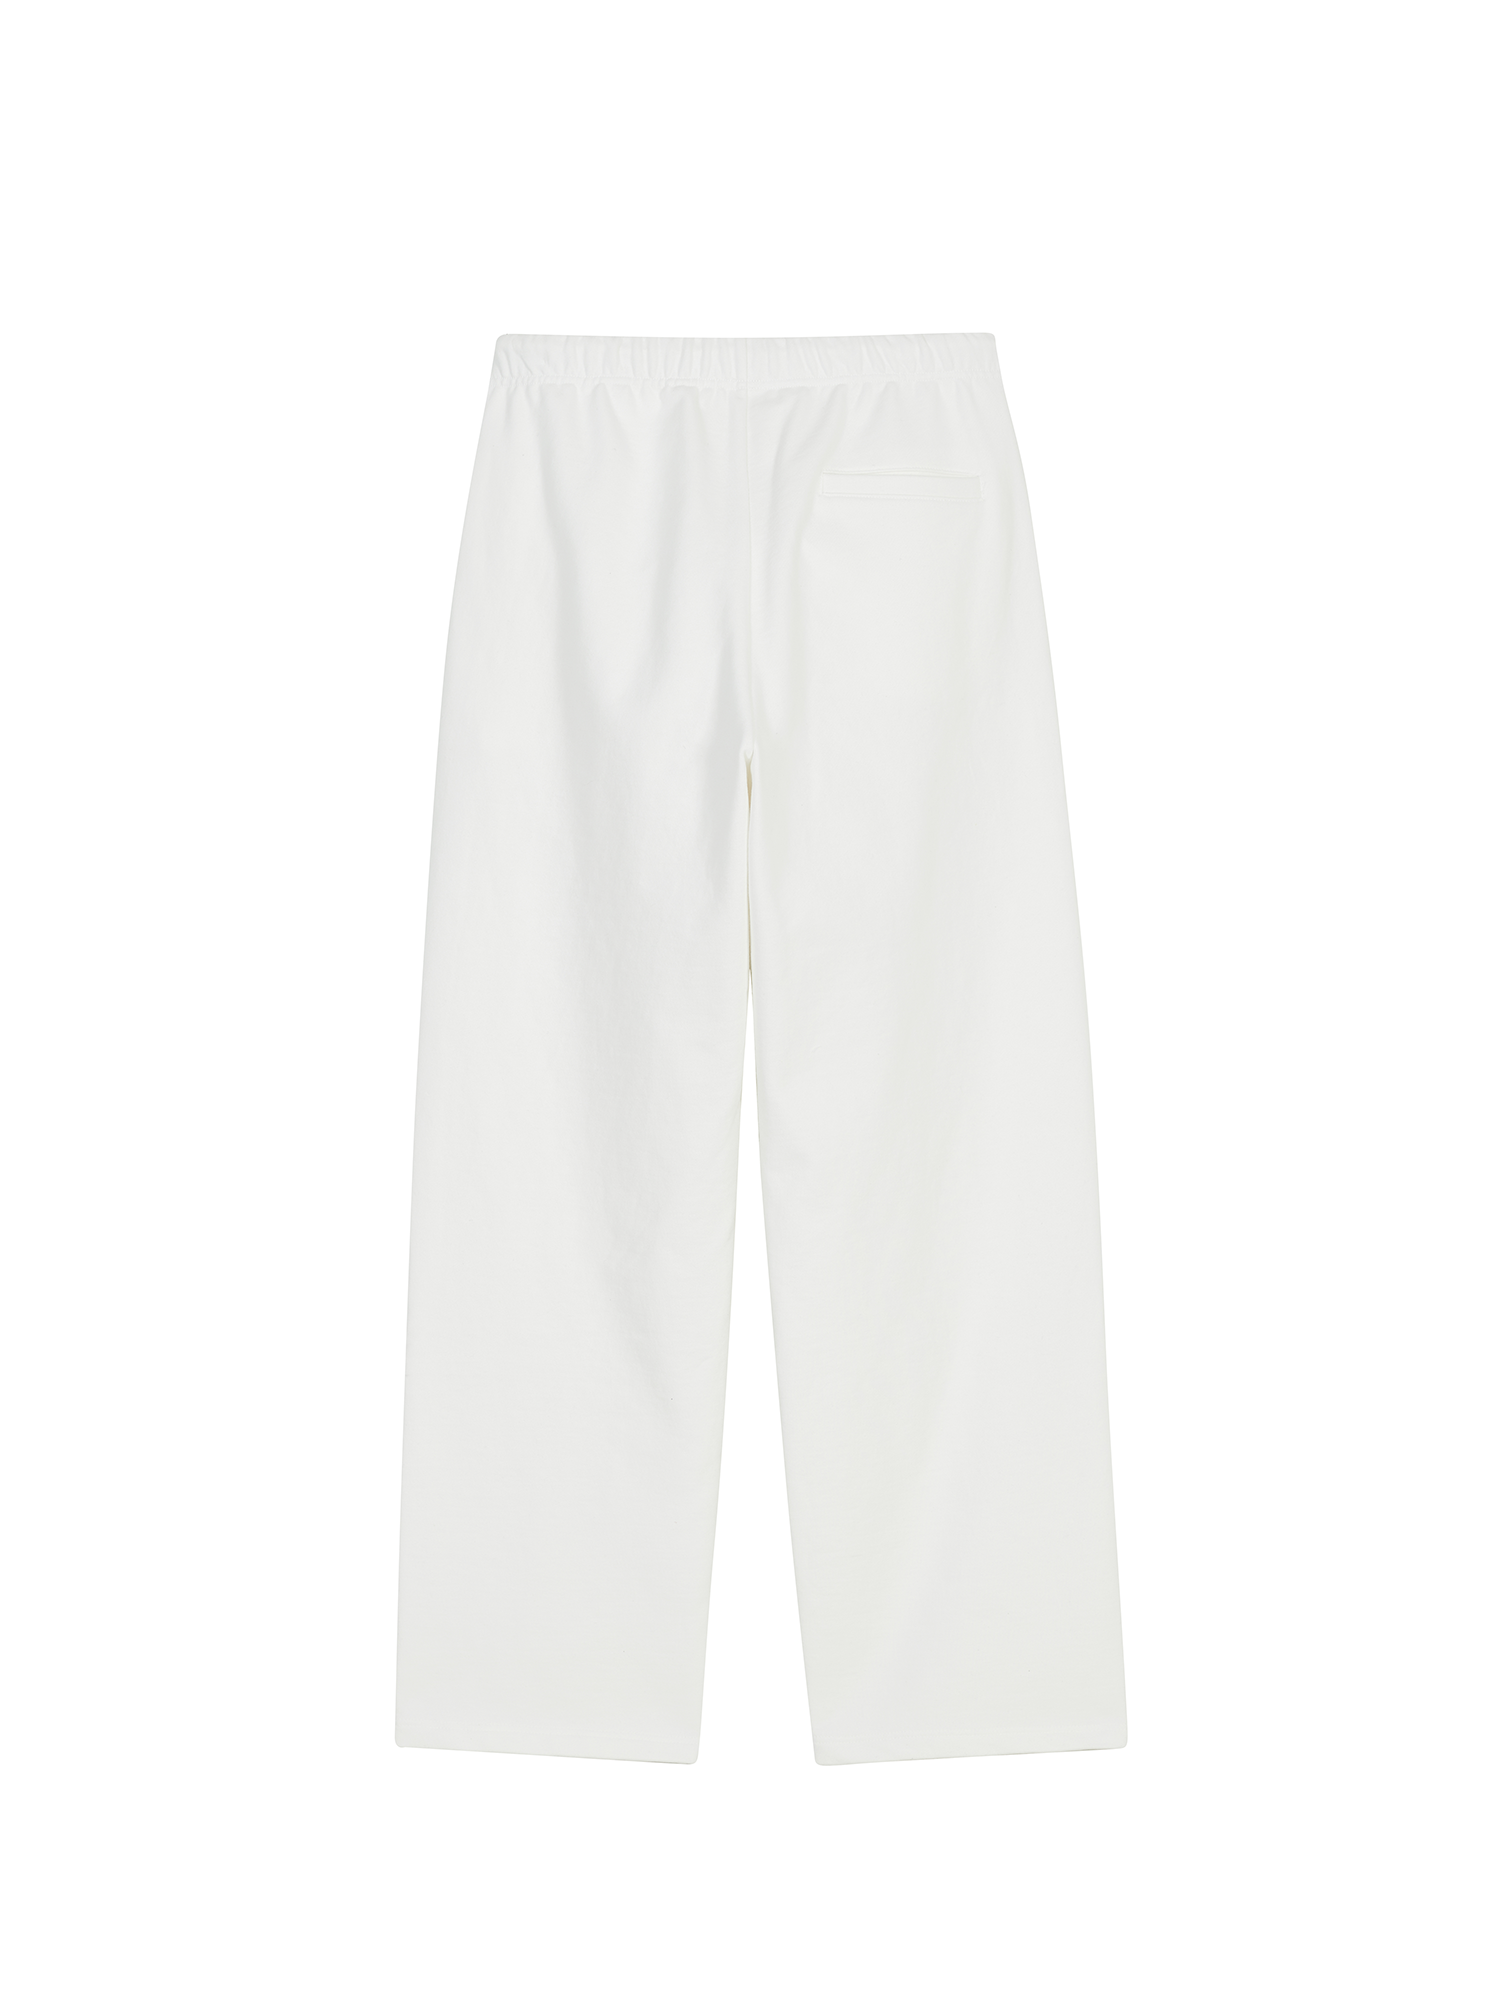 ReinSein Ivory Wide Pants